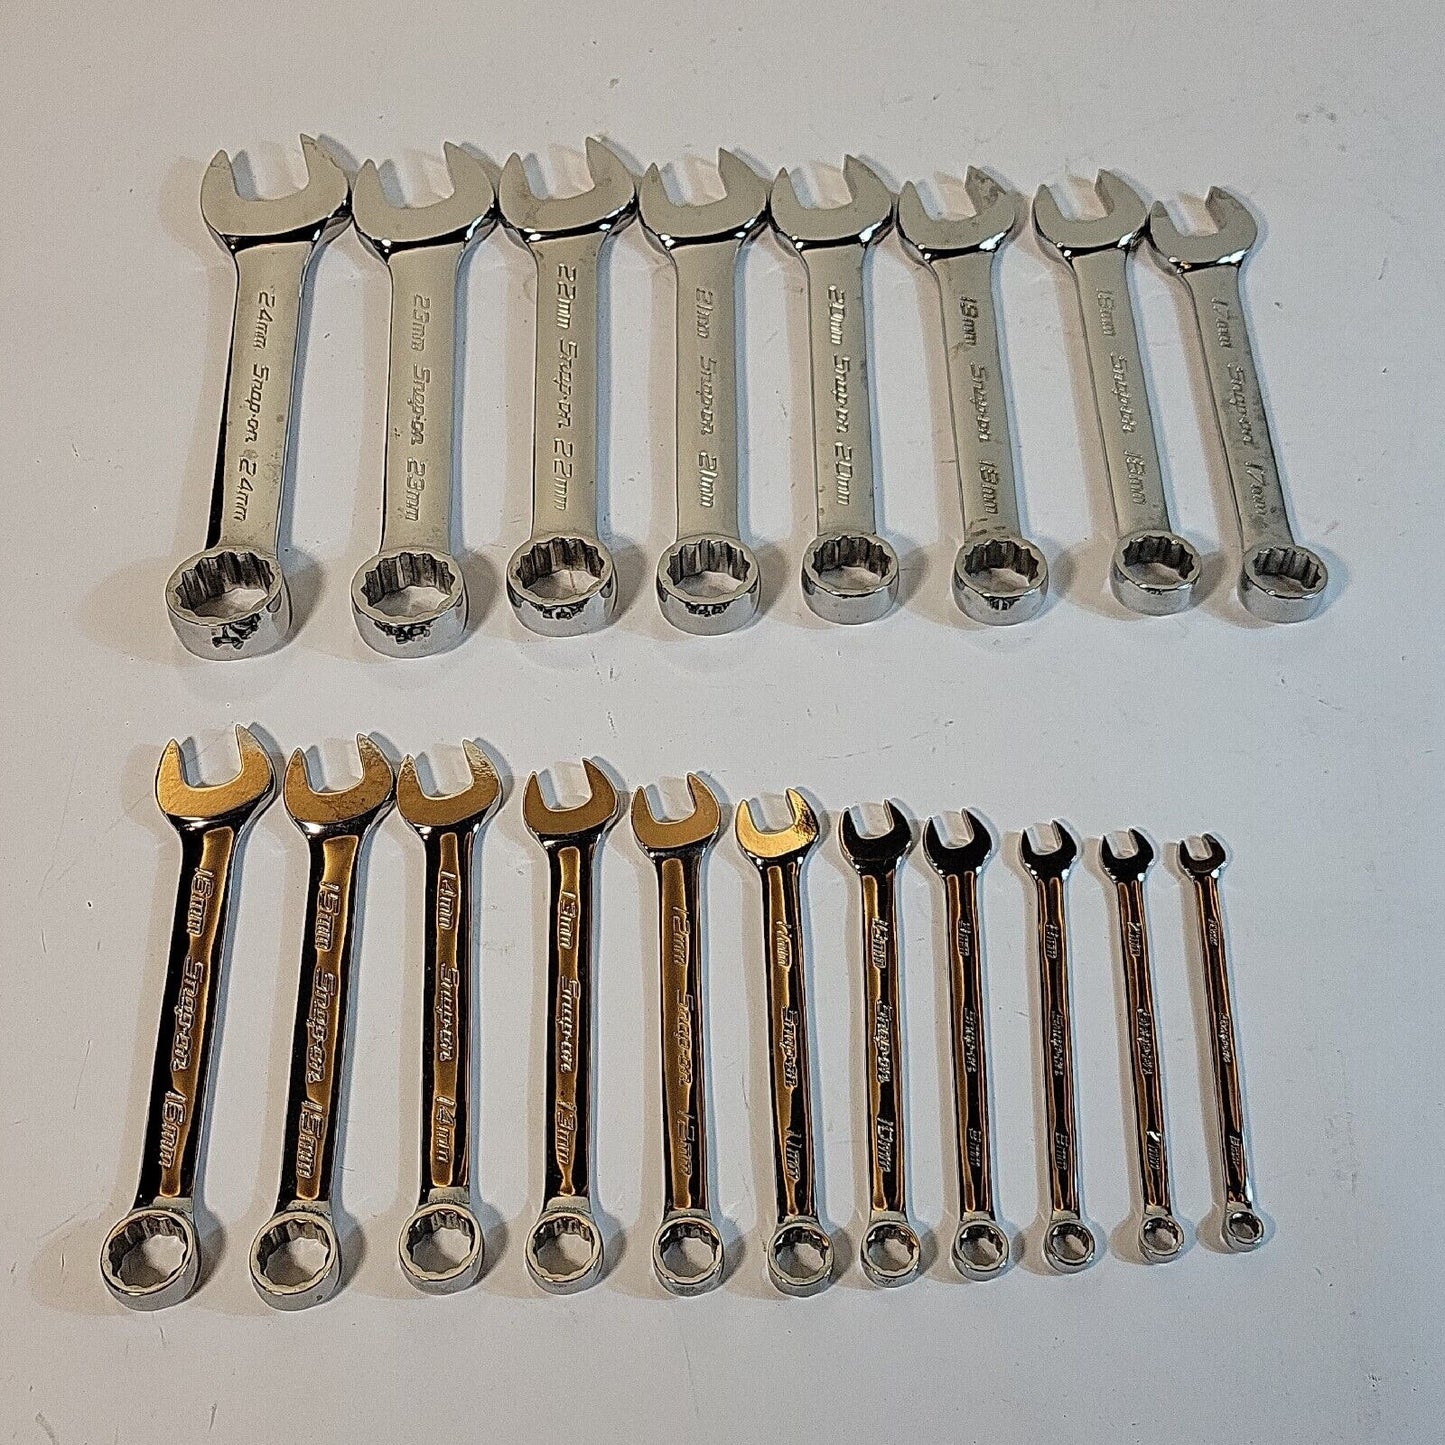 Snap-on 12-point Metric Flank Drive Short Comb Wrench 19 pc set 6mm to 24mm